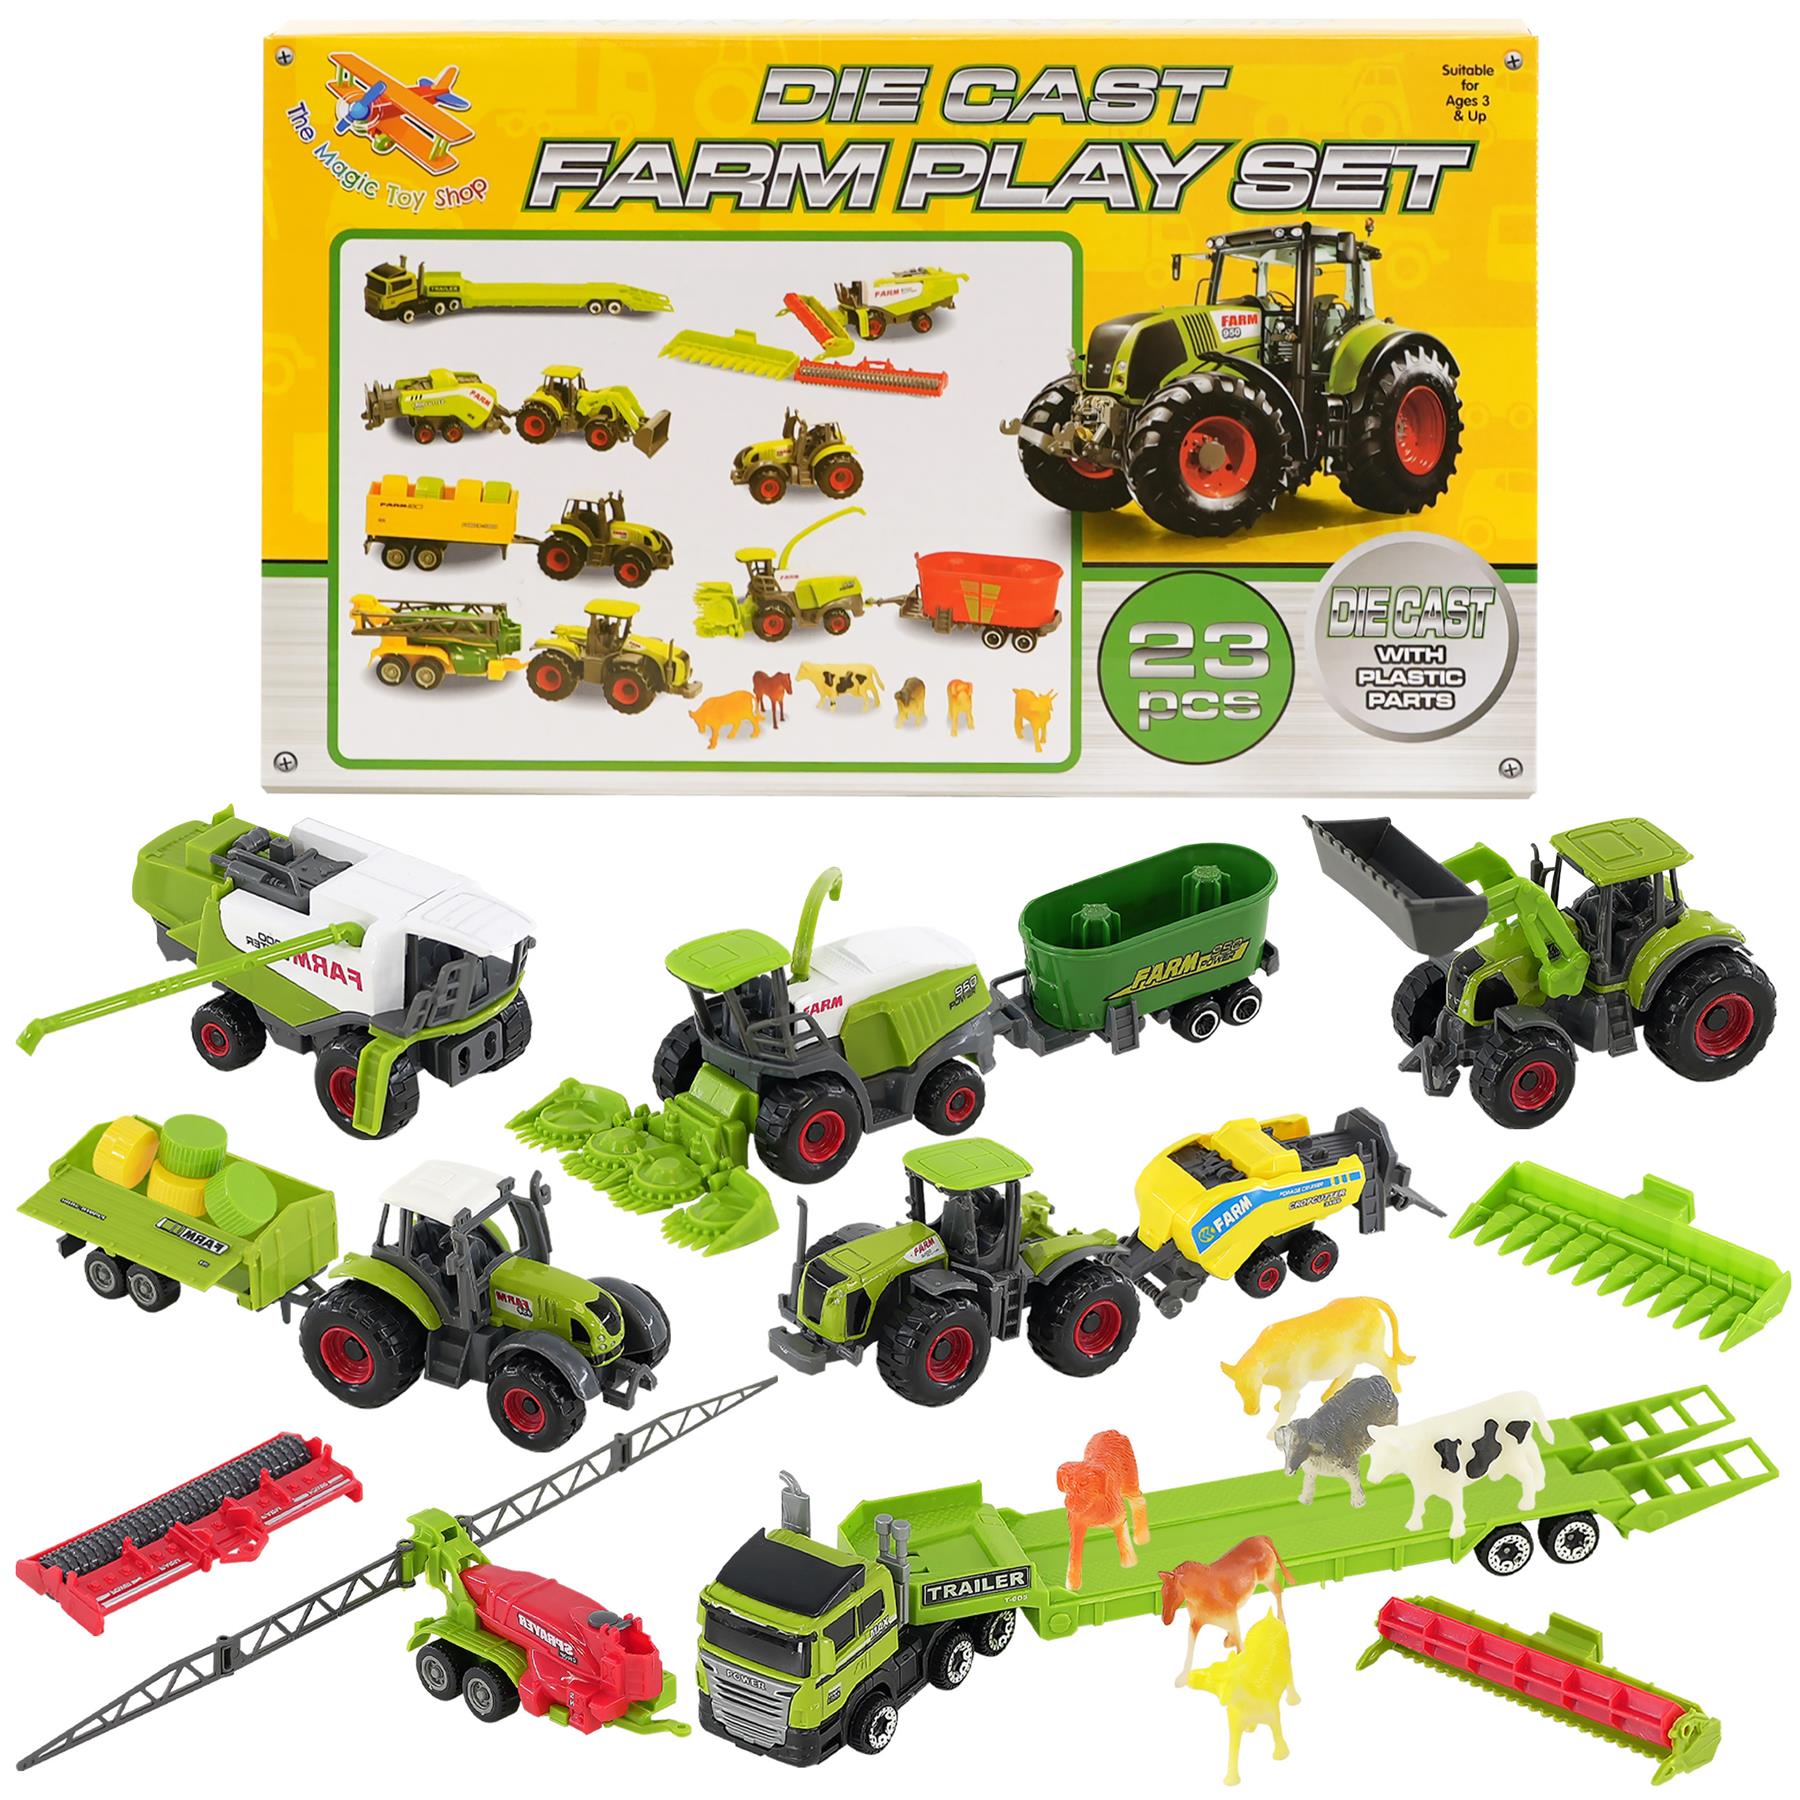 Diecast Tractor Set Collect Vehicles Play Set 22 Piece by The Magic Toy Shop - The Magic Toy Shop